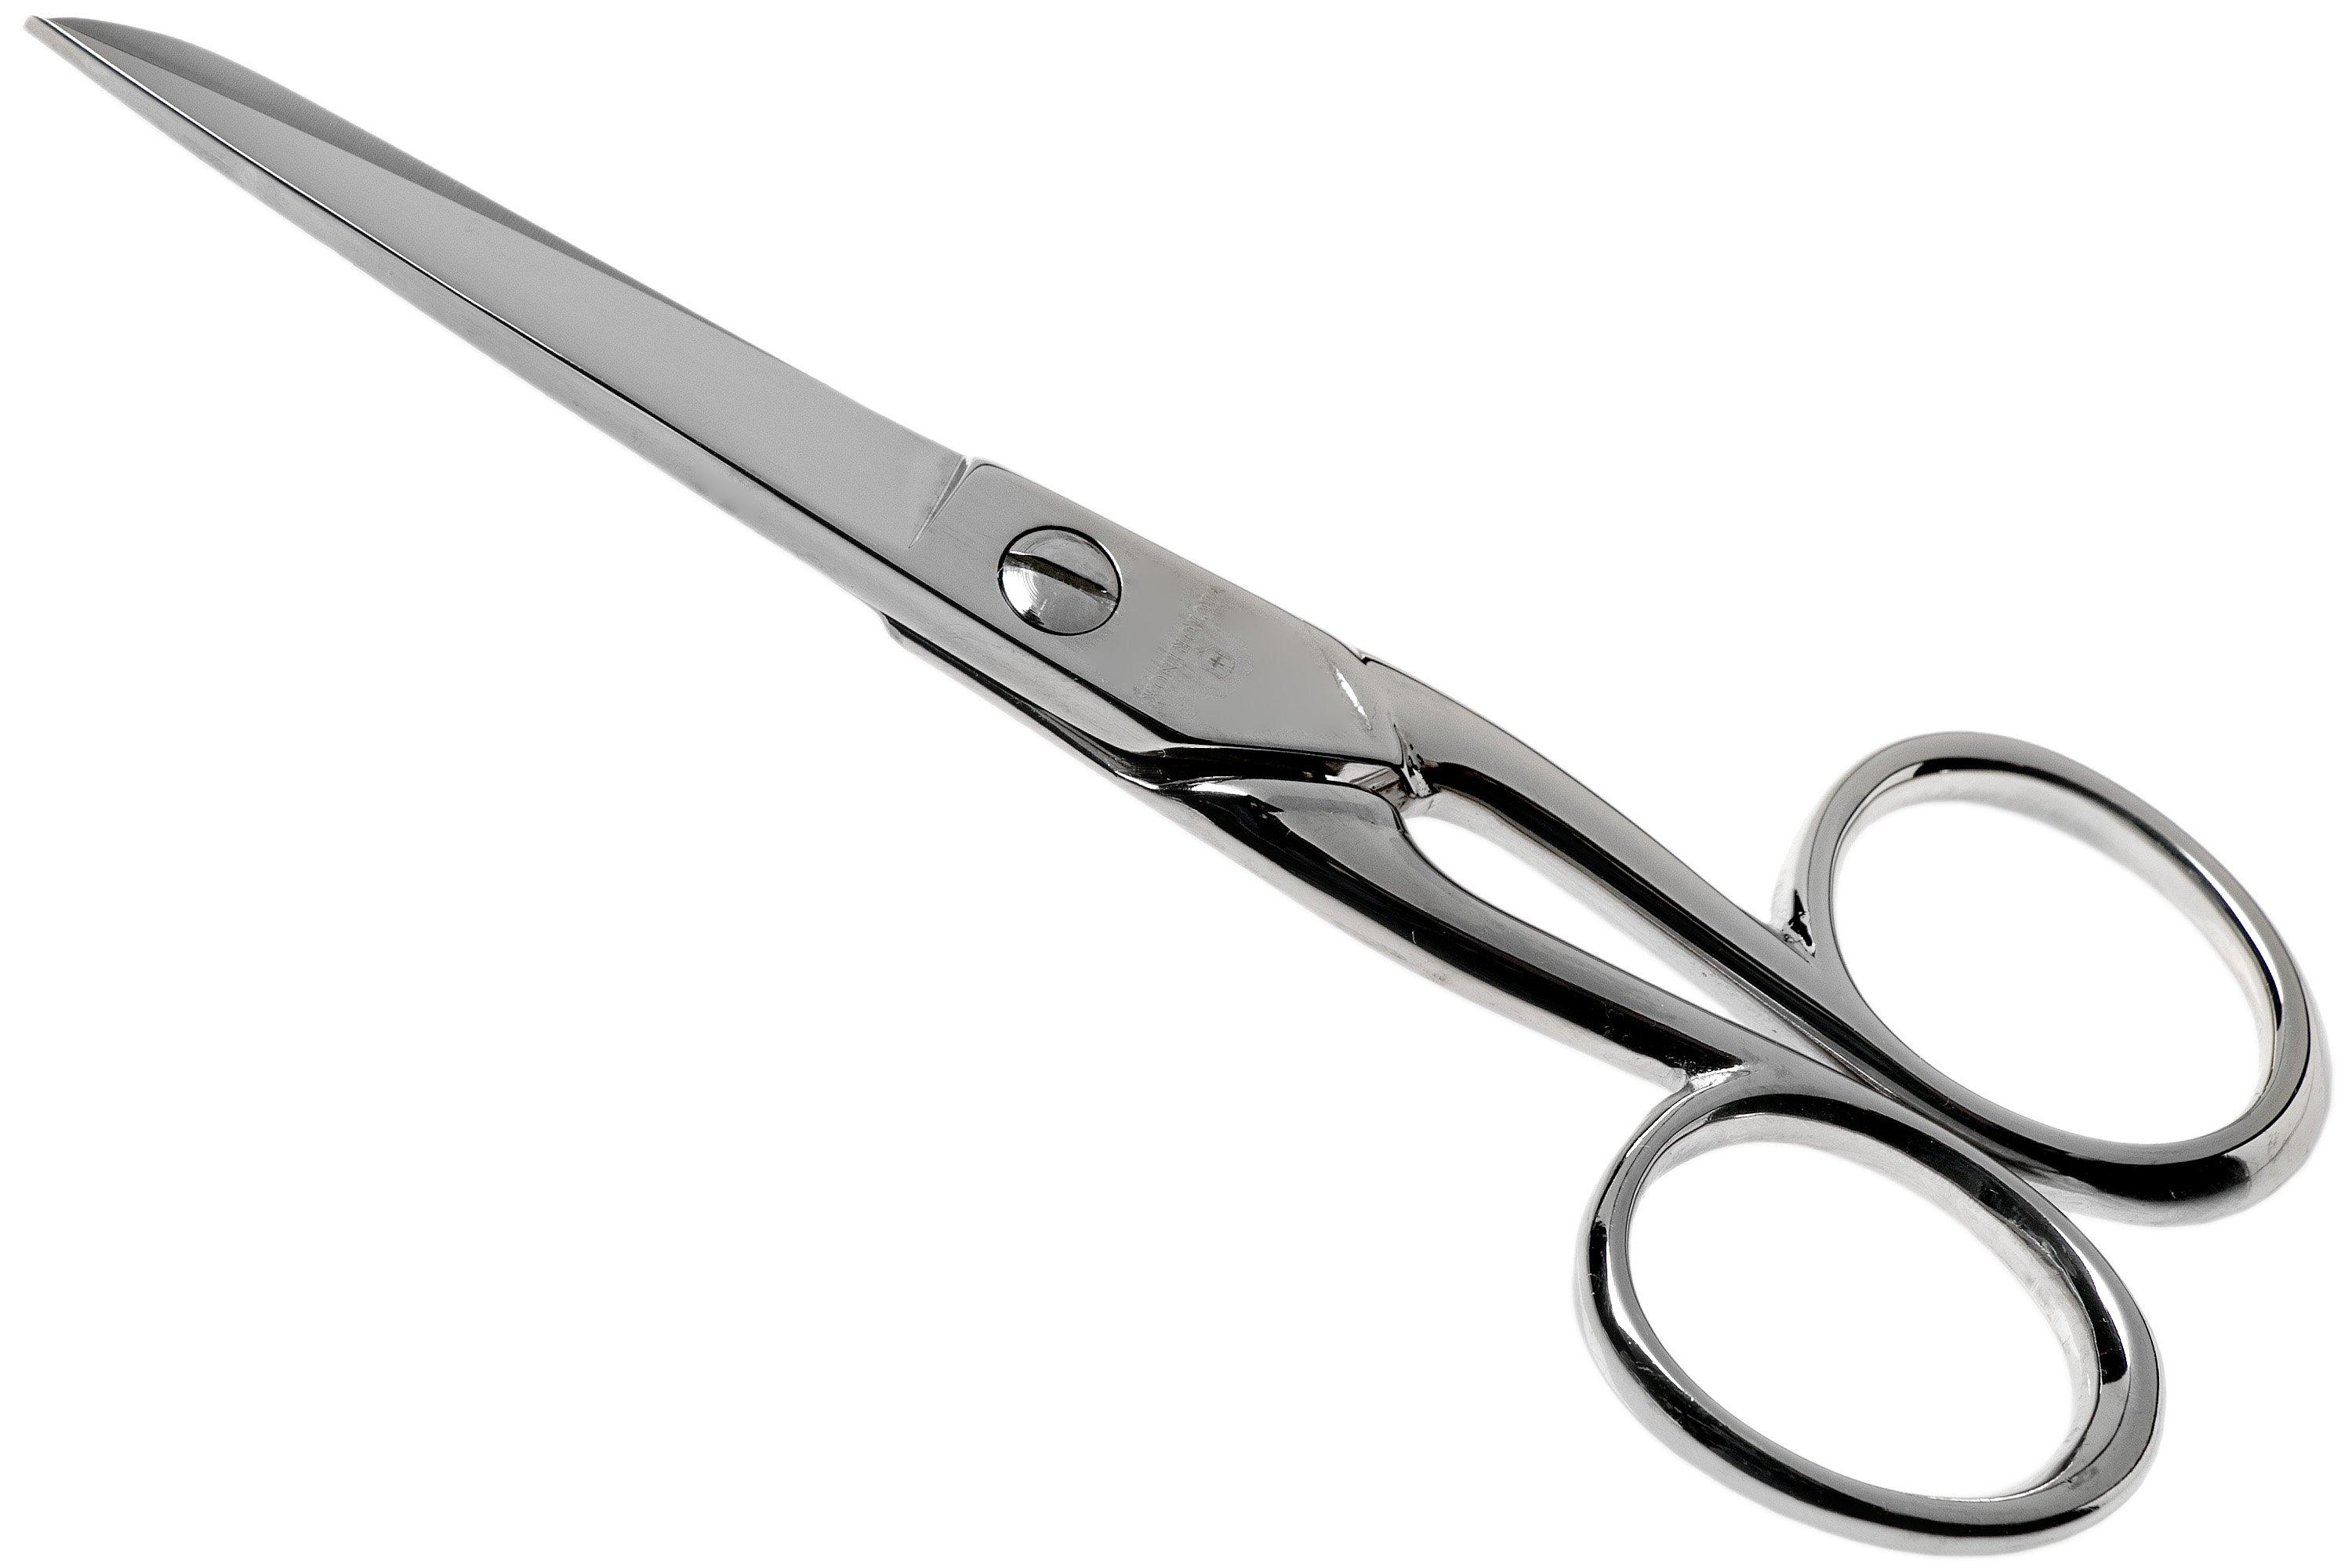 Victorinox France 8.1014.13, 13 cm household scissors | Advantageously  shopping at